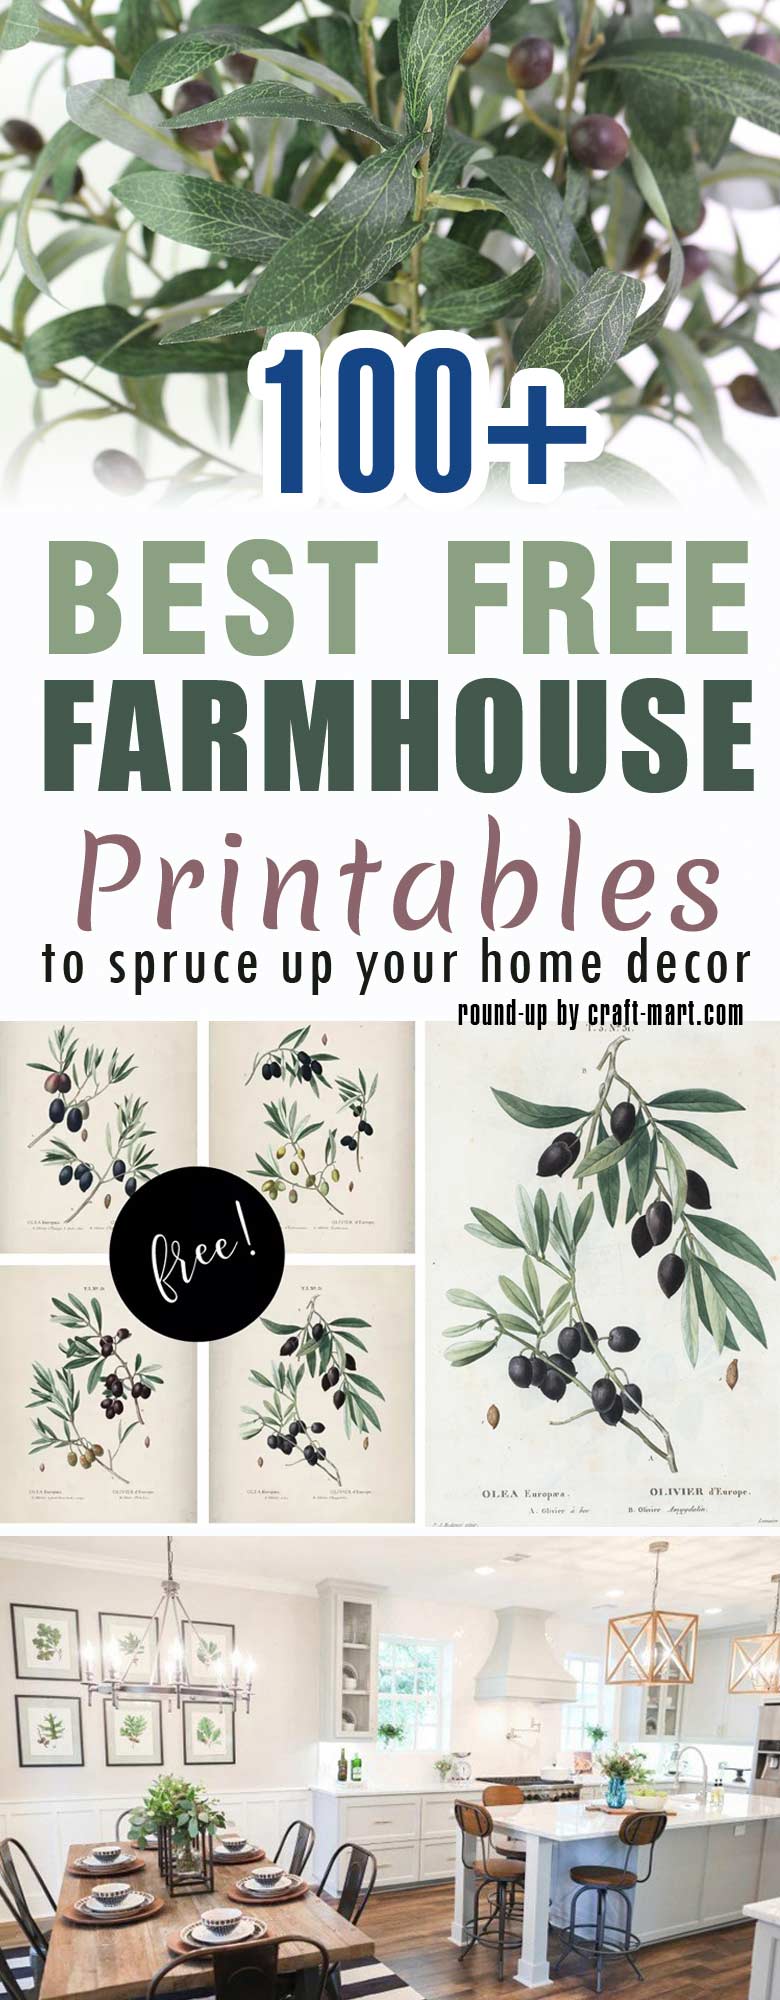 100 best free farmhouse printables to spruce up your home decor by craft-mart 